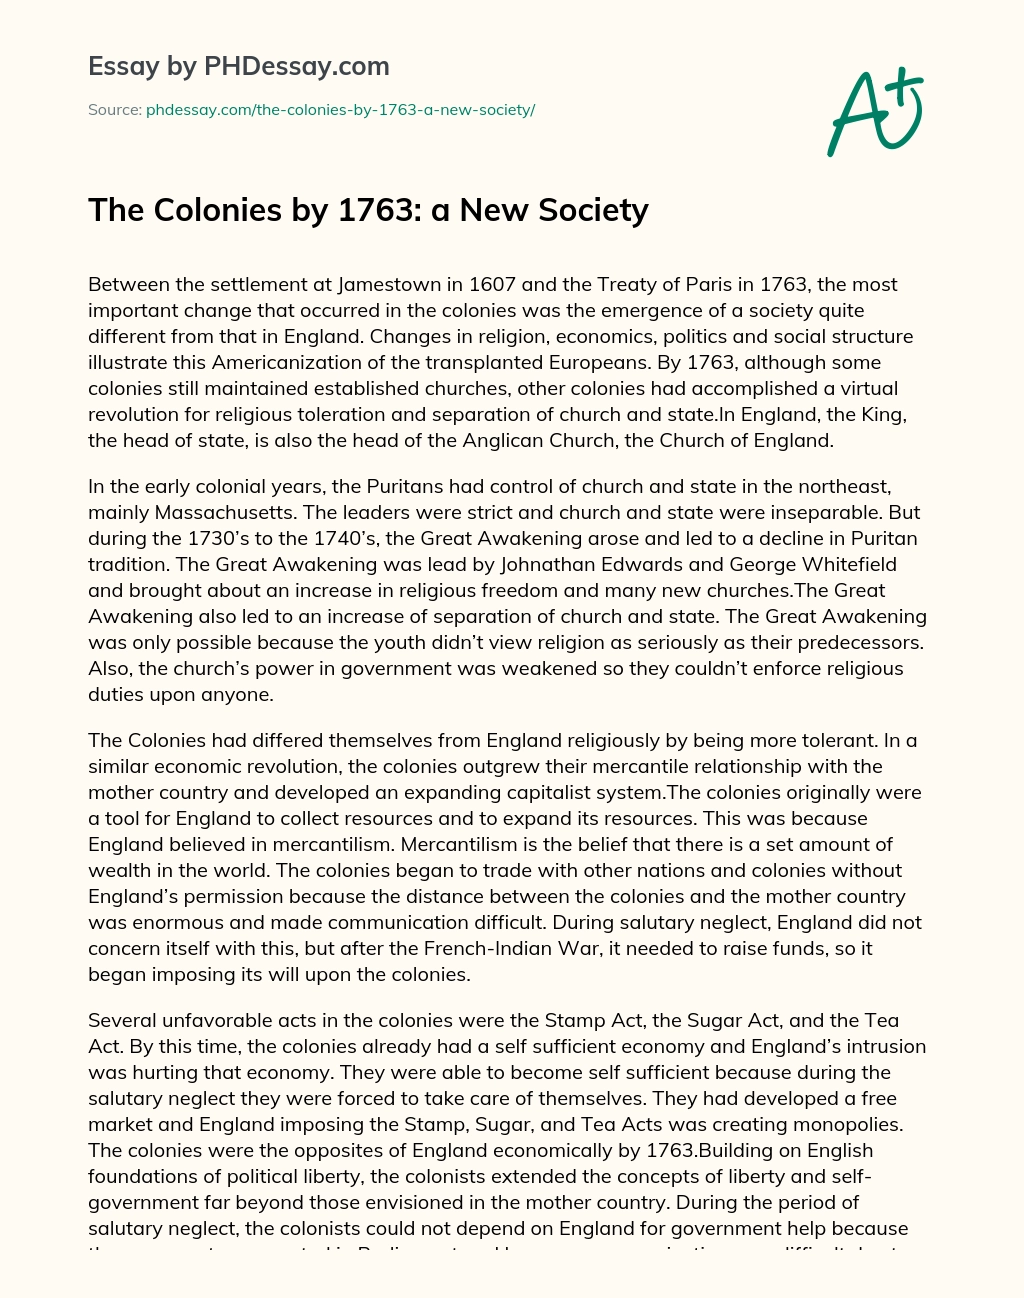 The Colonies by 1763: a New Society essay